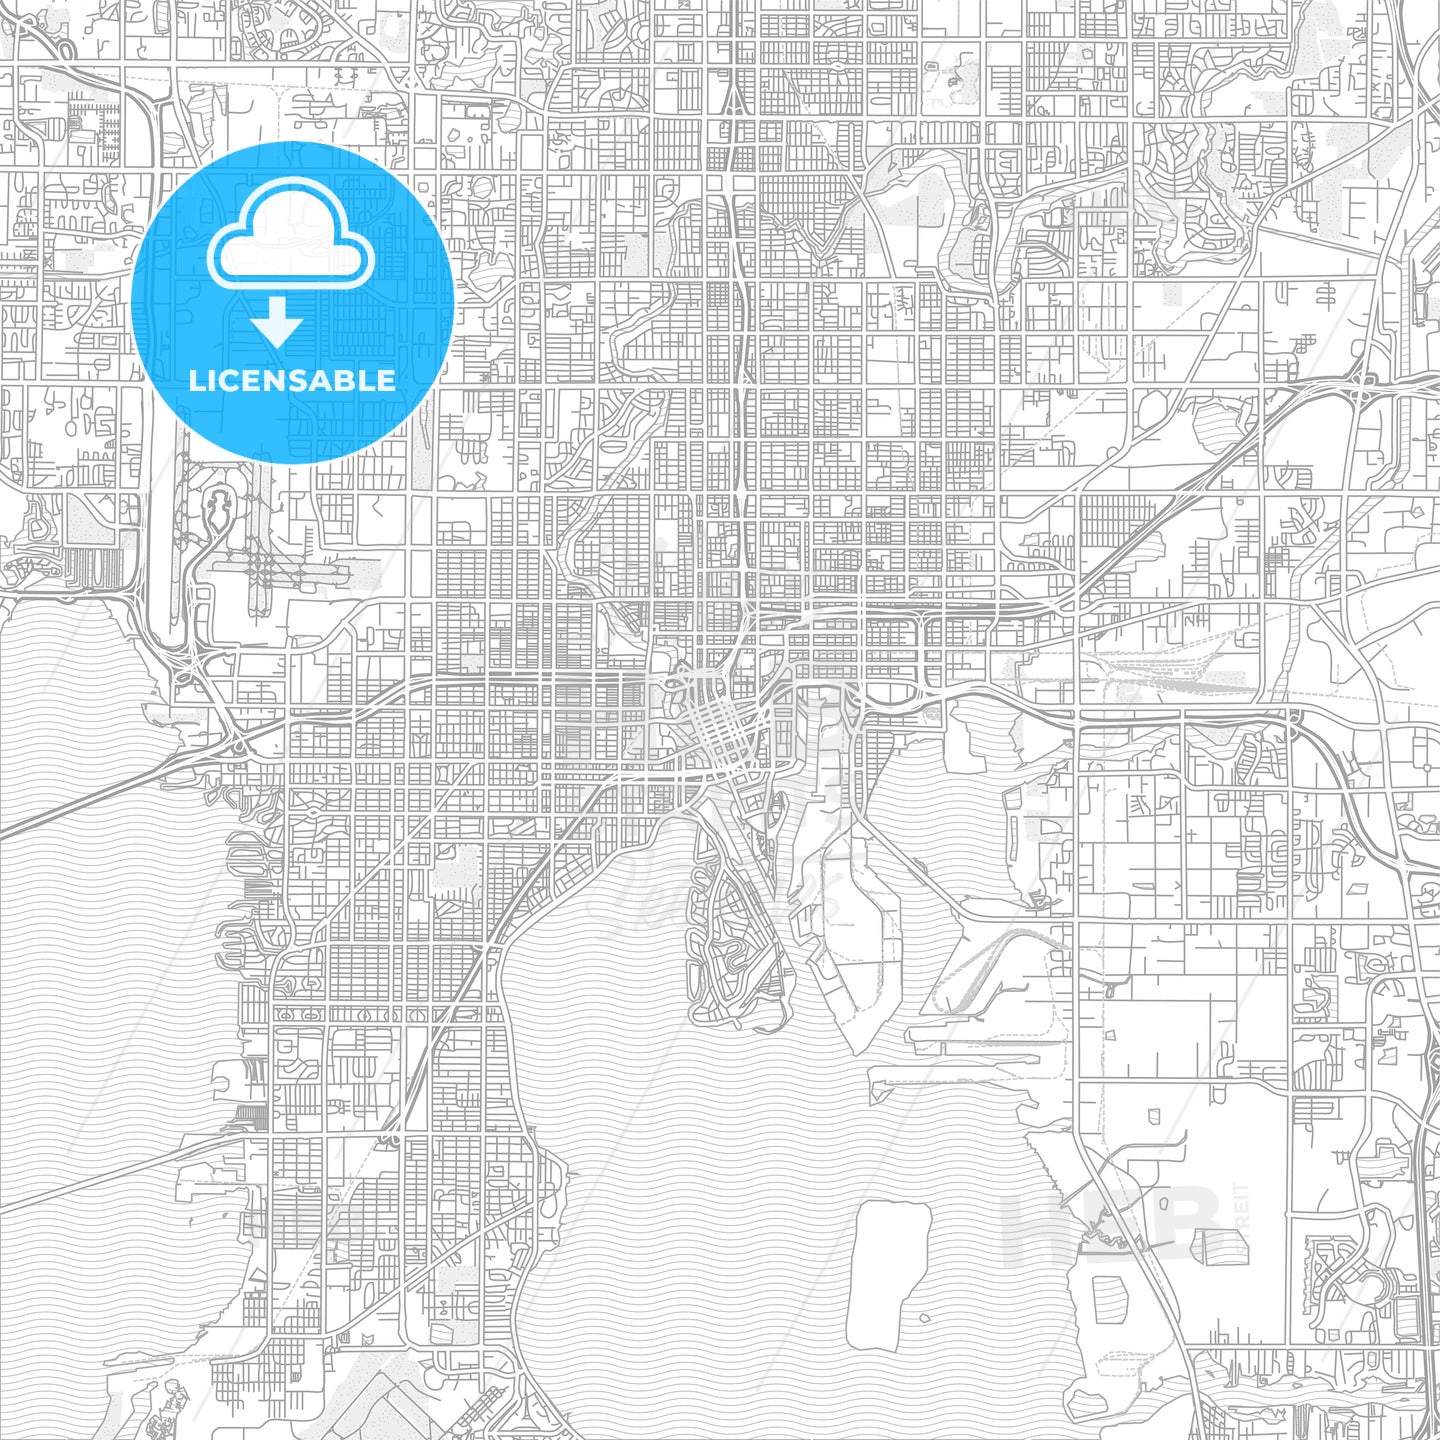 Tampa, Florida, USA, bright outlined vector map